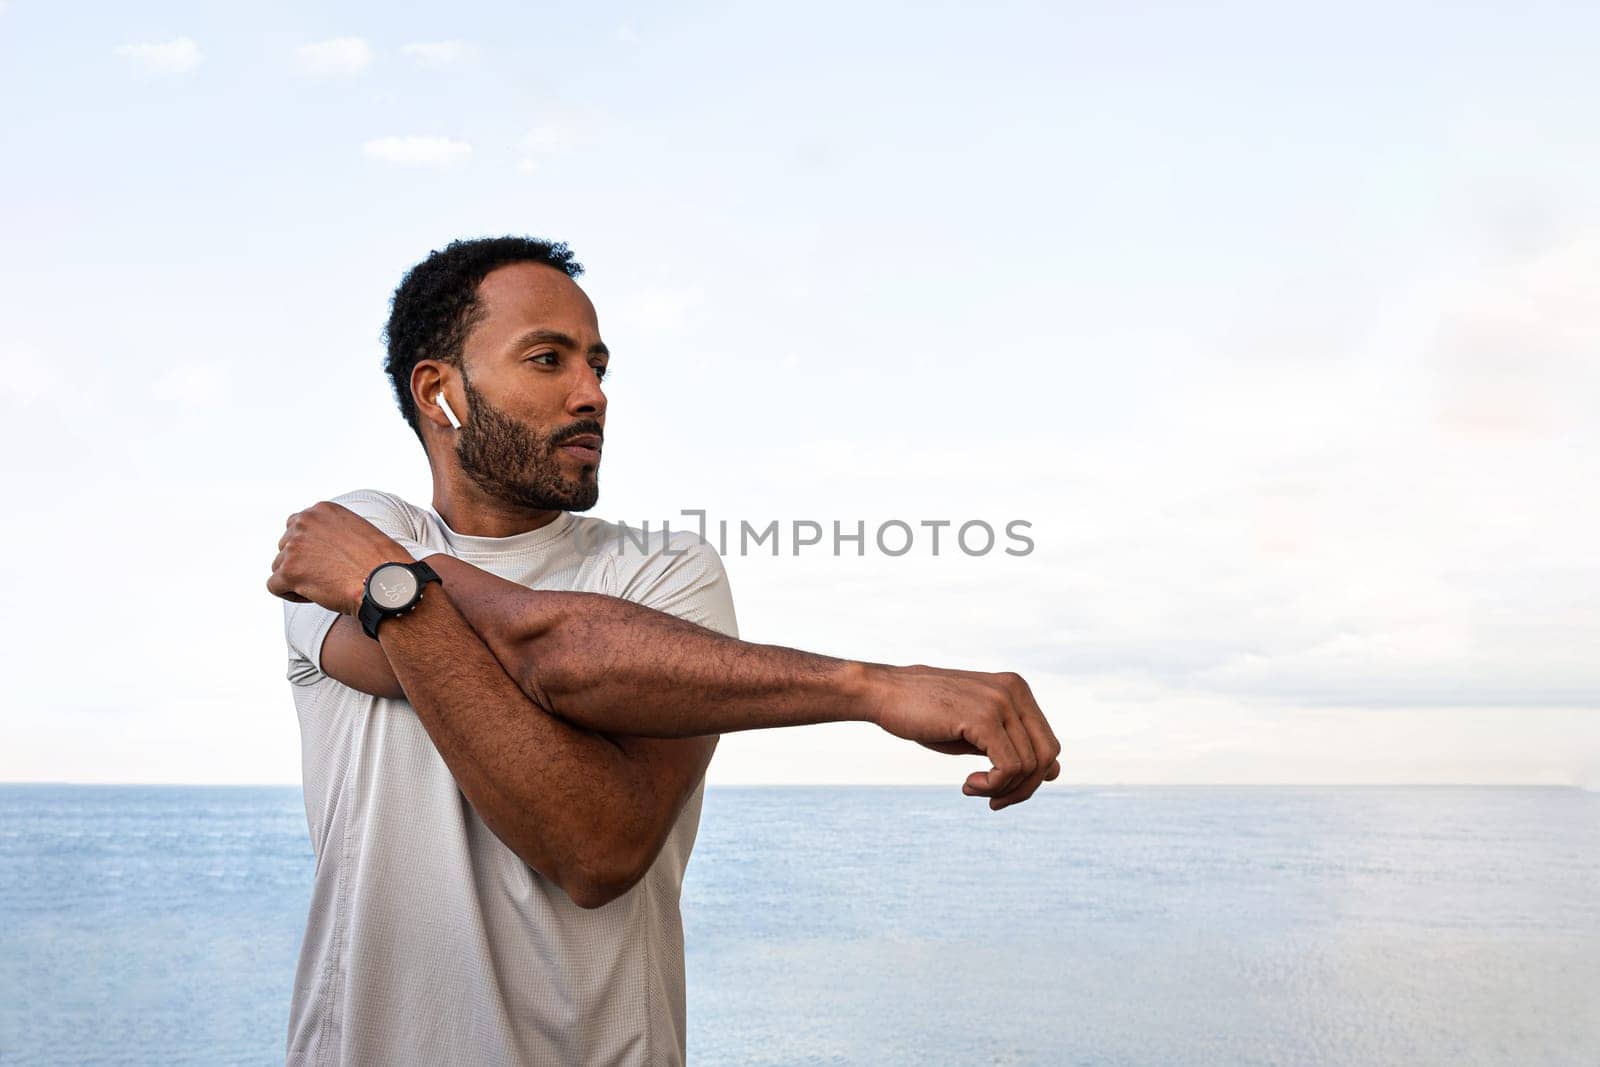 African American man stretching arm, warming up before workout and running session outdoors. Exercising near the ocean. by Hoverstock